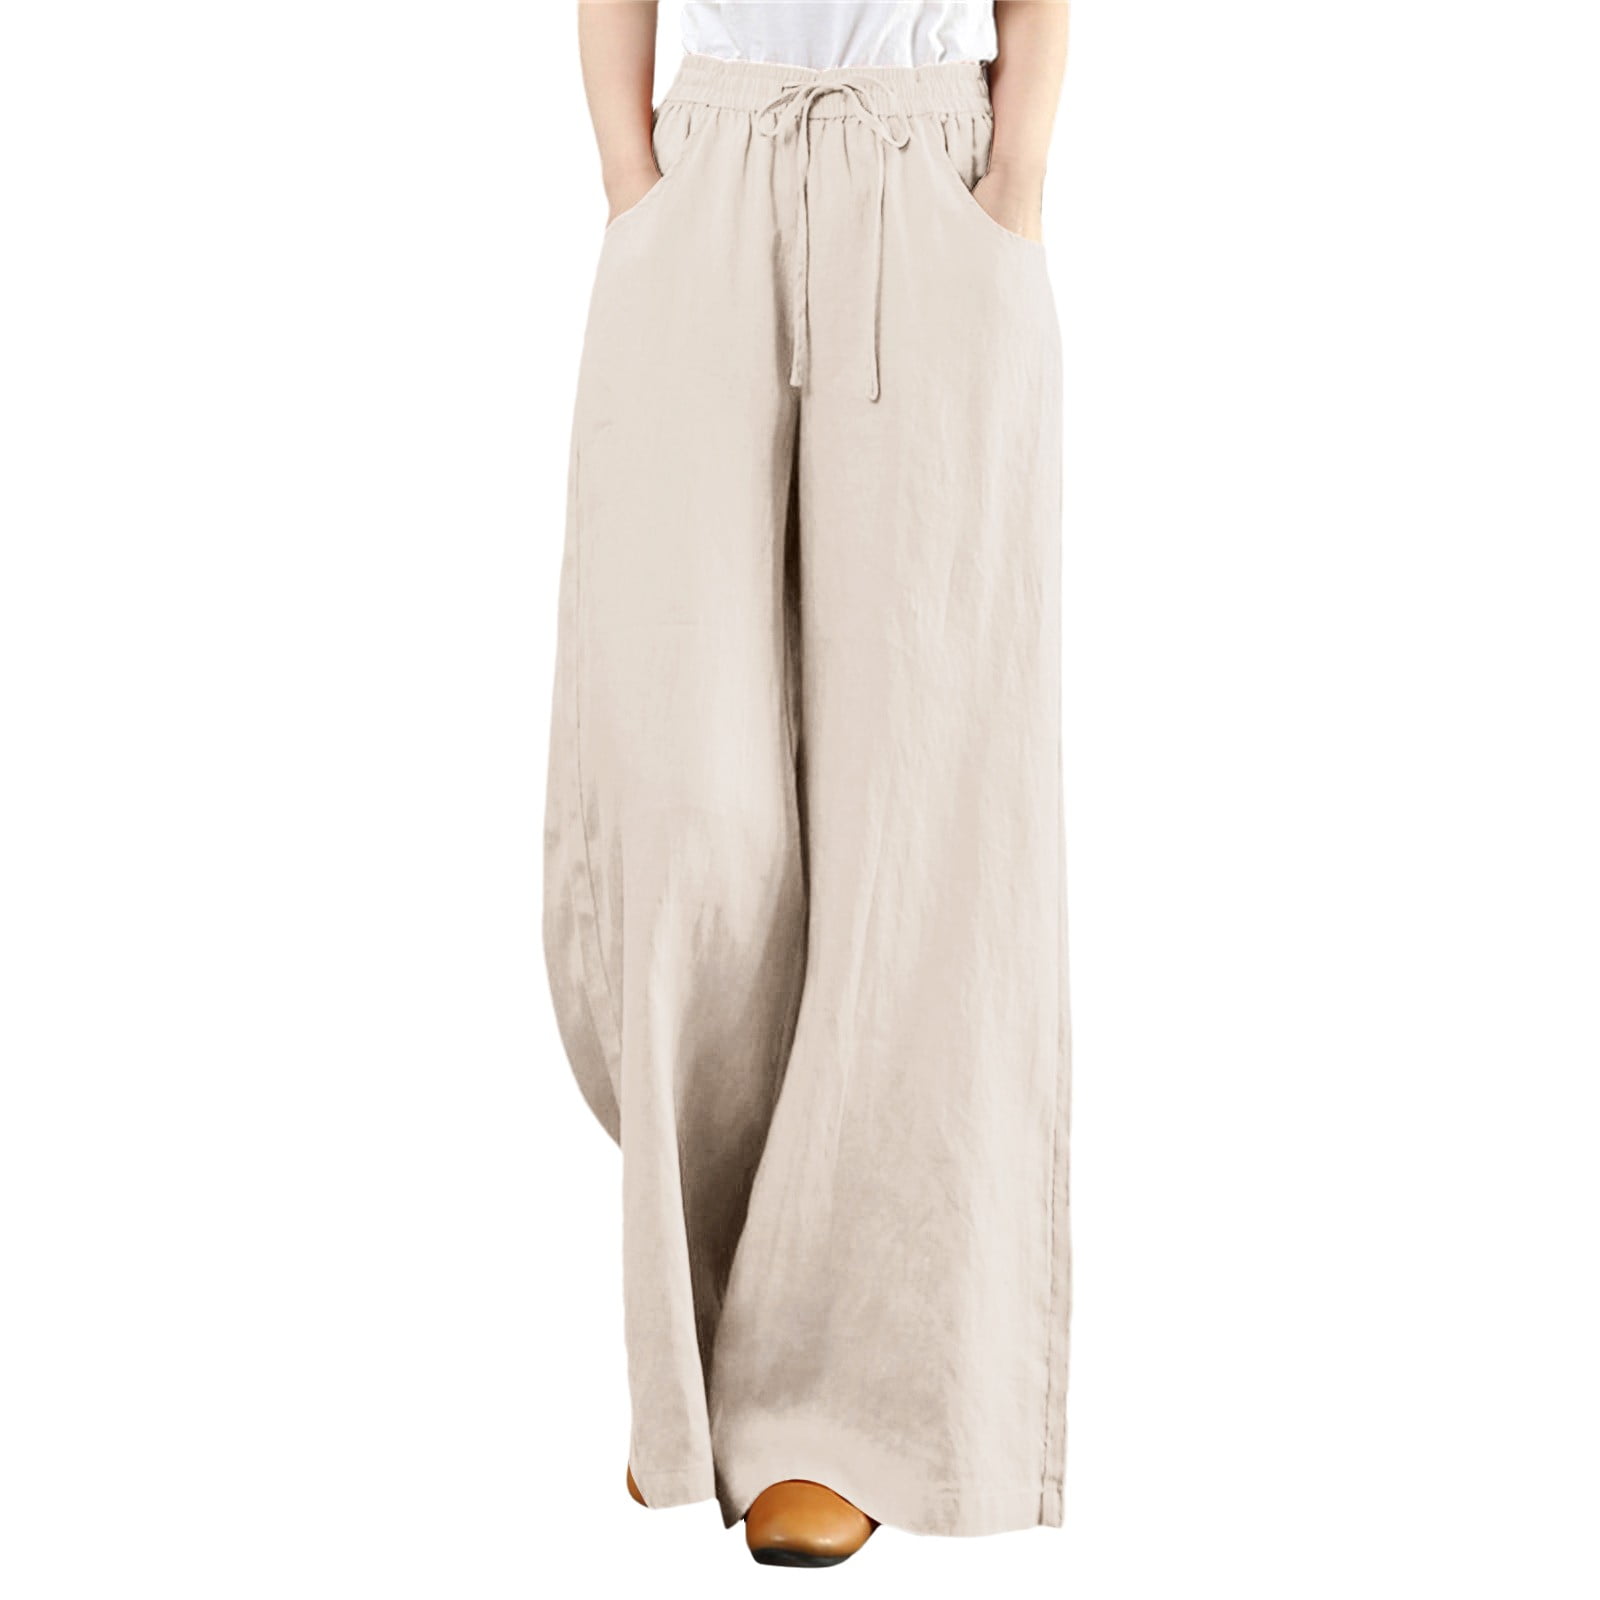 Daznico Women Summer Solid Wide Leg Pants High Waisted Loose Pants Wide Leg  Long Pant Trousers With Pocket Pants for Women Beige S